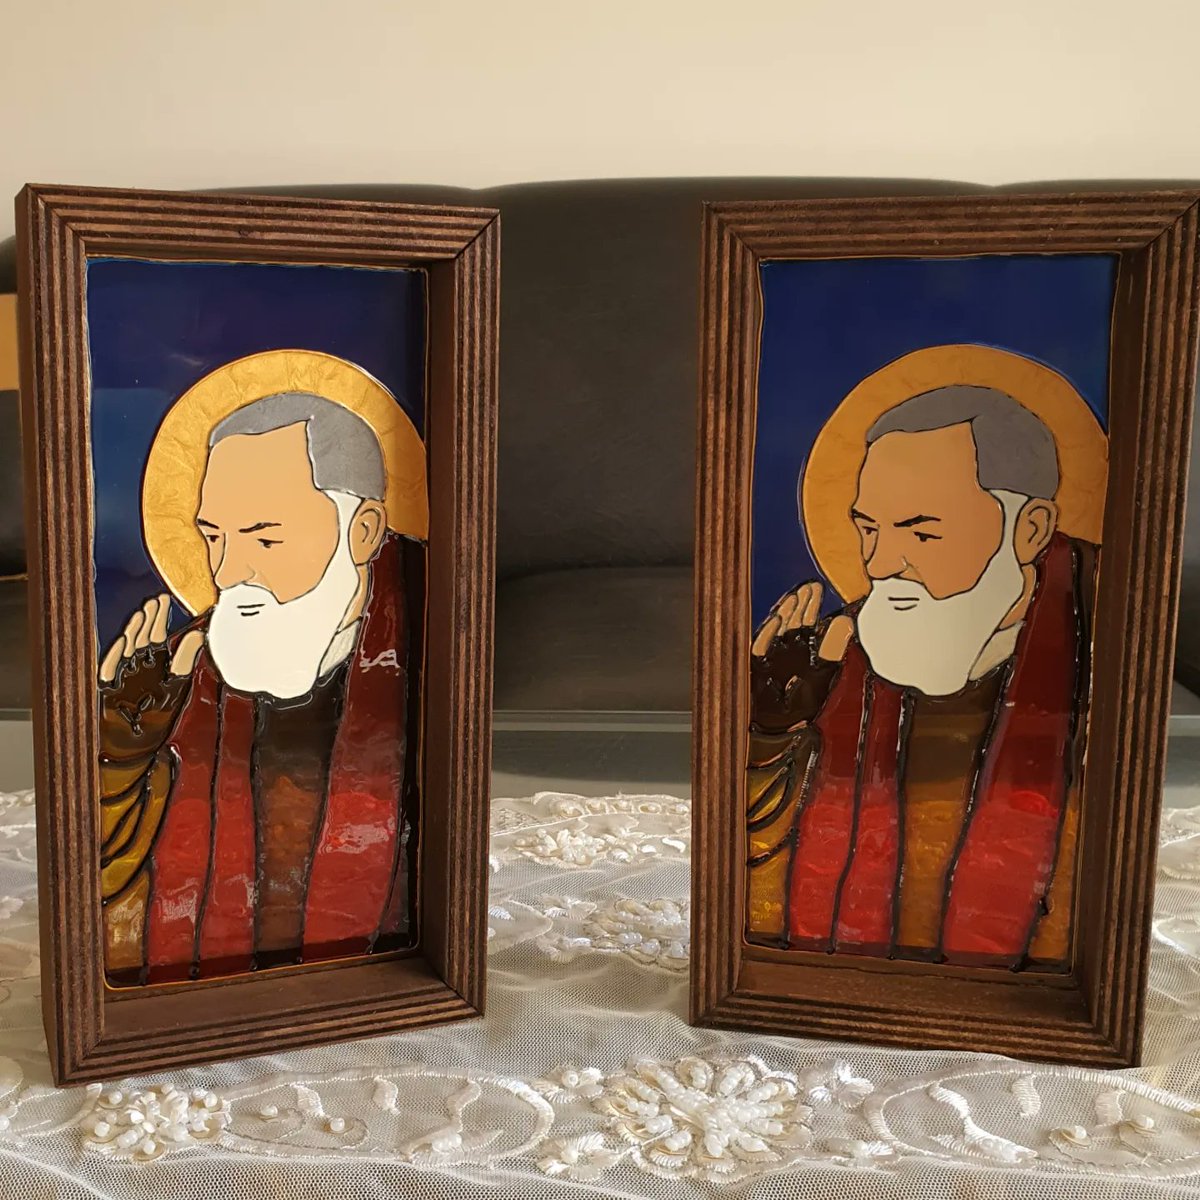 NEW DESIGN 
Pdre Pio vitrail glass 
with wooden frame 
handmade

FOR ANY INFO CONTACT US ON +9613049055 or DM 
#vitrail #vitrail_art #communion #firstcommunion #1stcommunion #souvenir #baptism #baptismsouvenir #religiousitems #MWZGHEIB #MW  #mwzgheibsarl  #padrepio